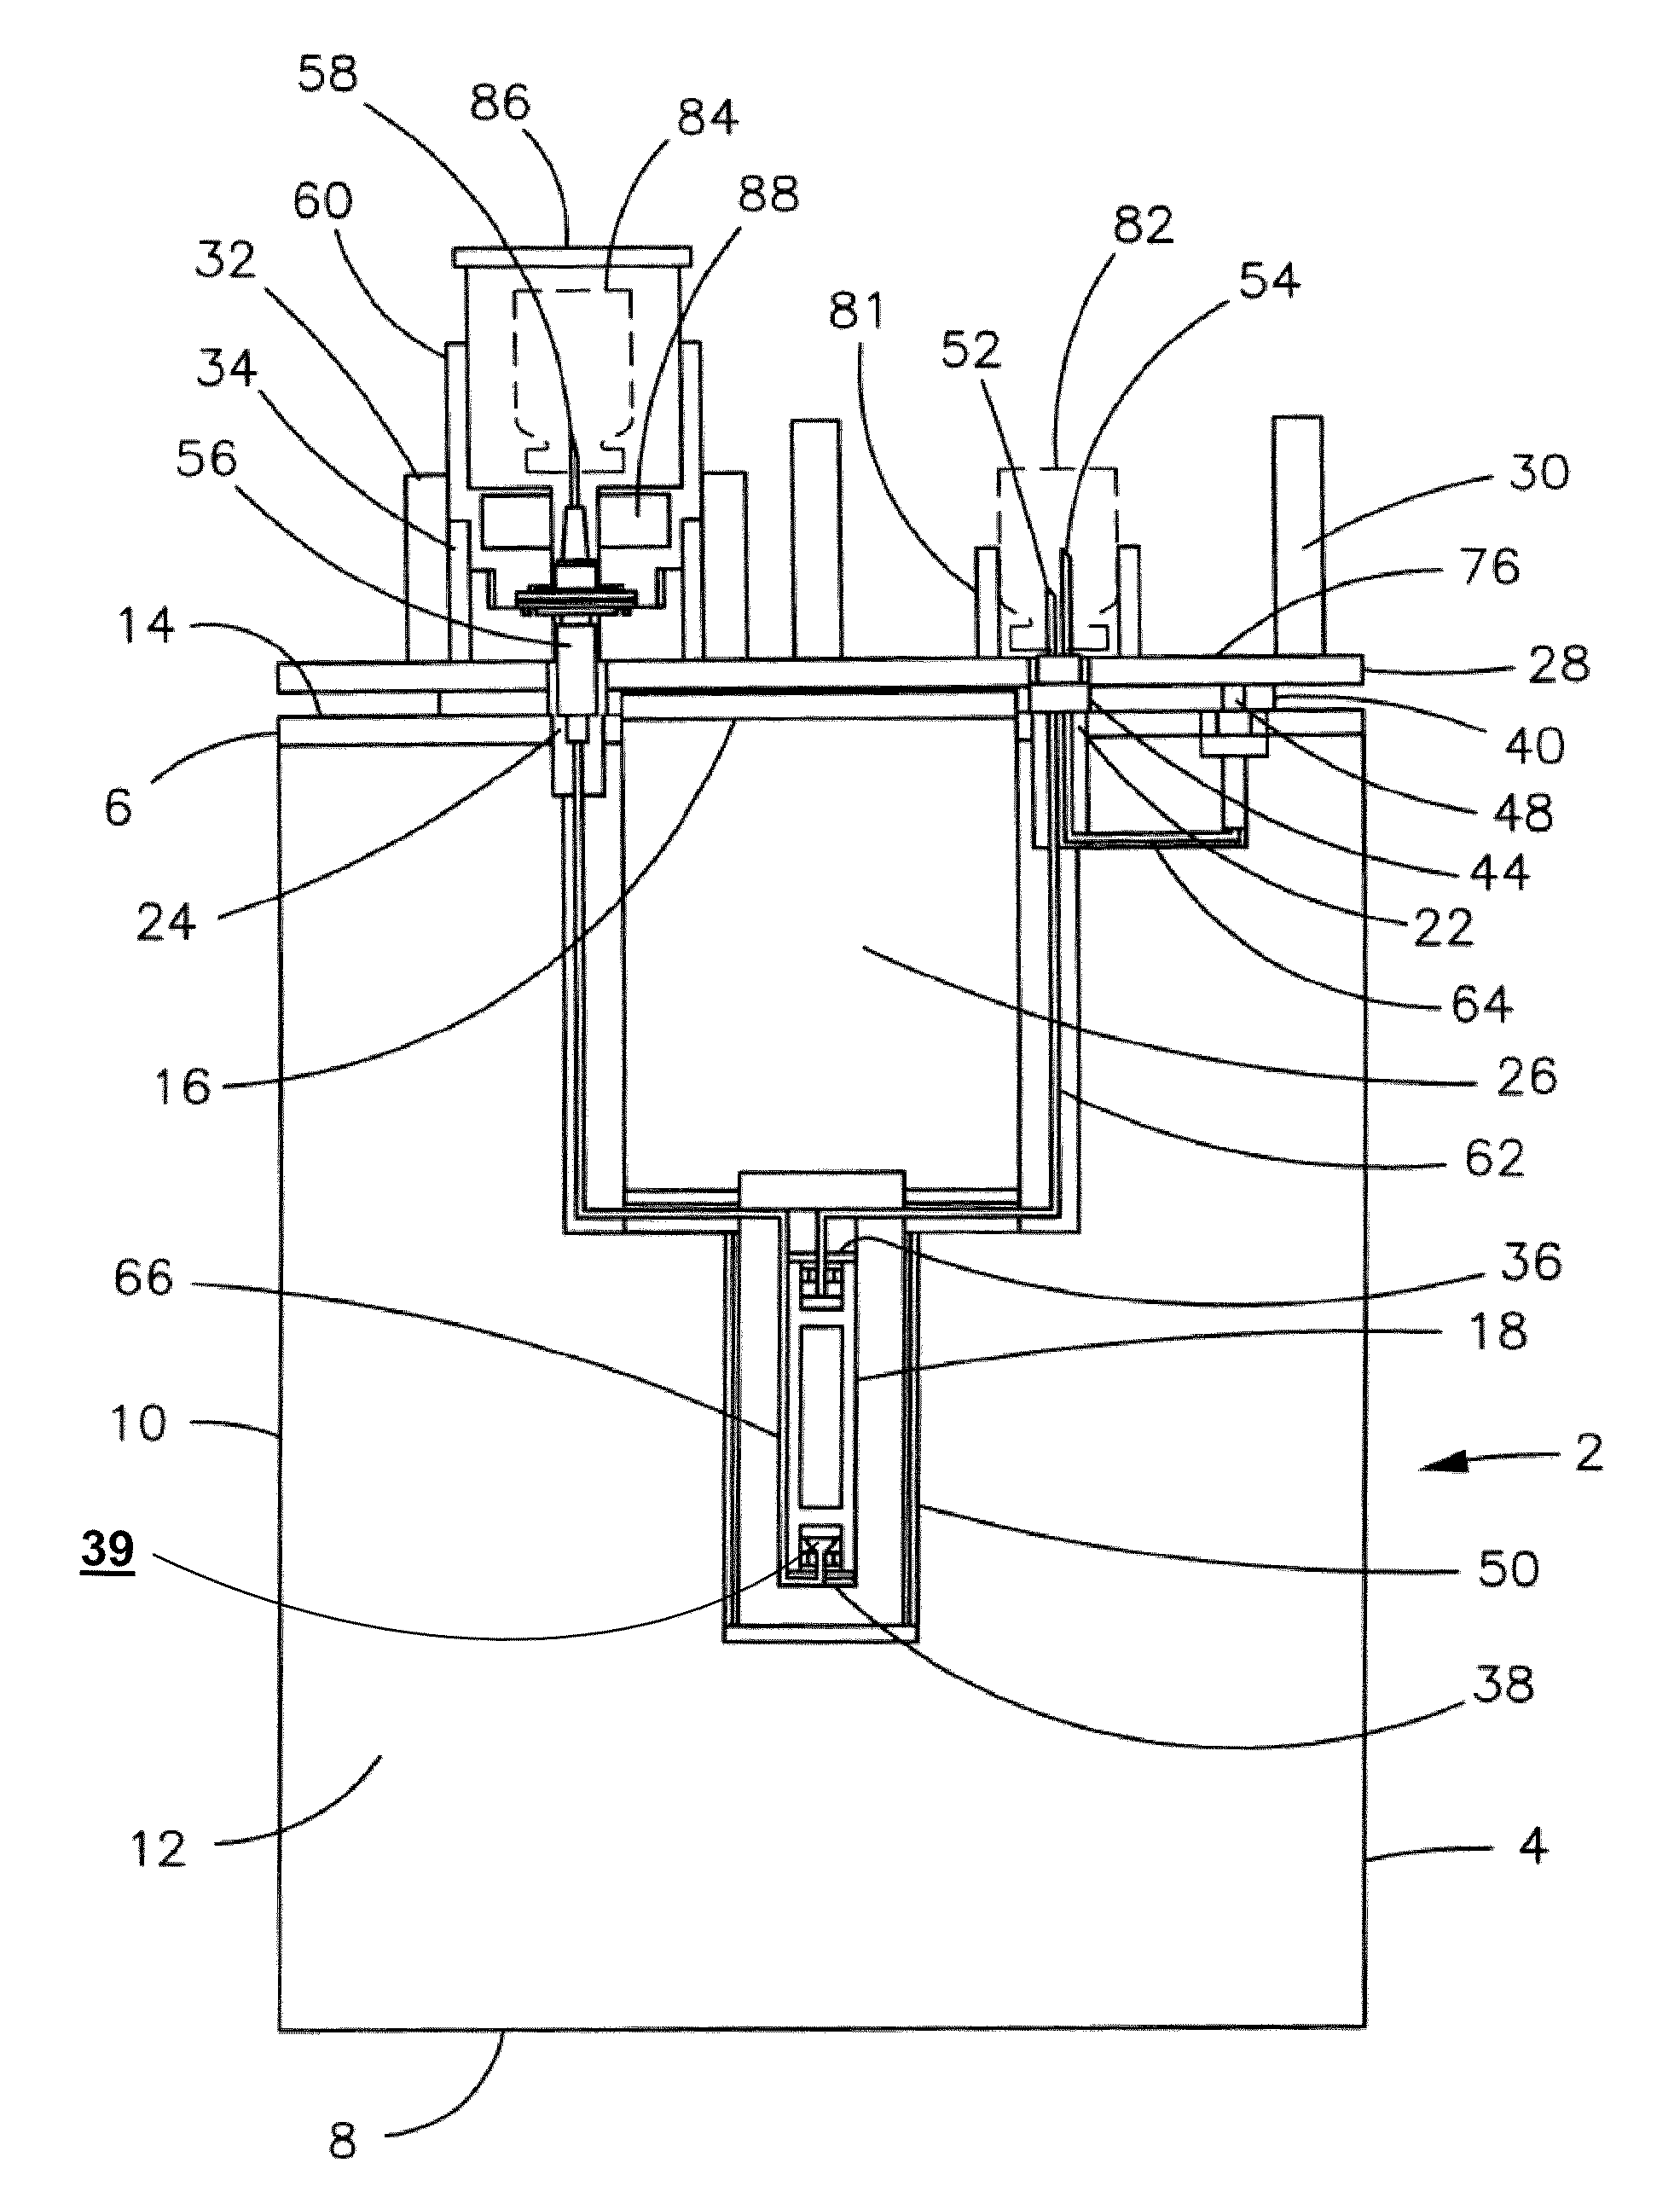 Systems and methods for radioisotope generation